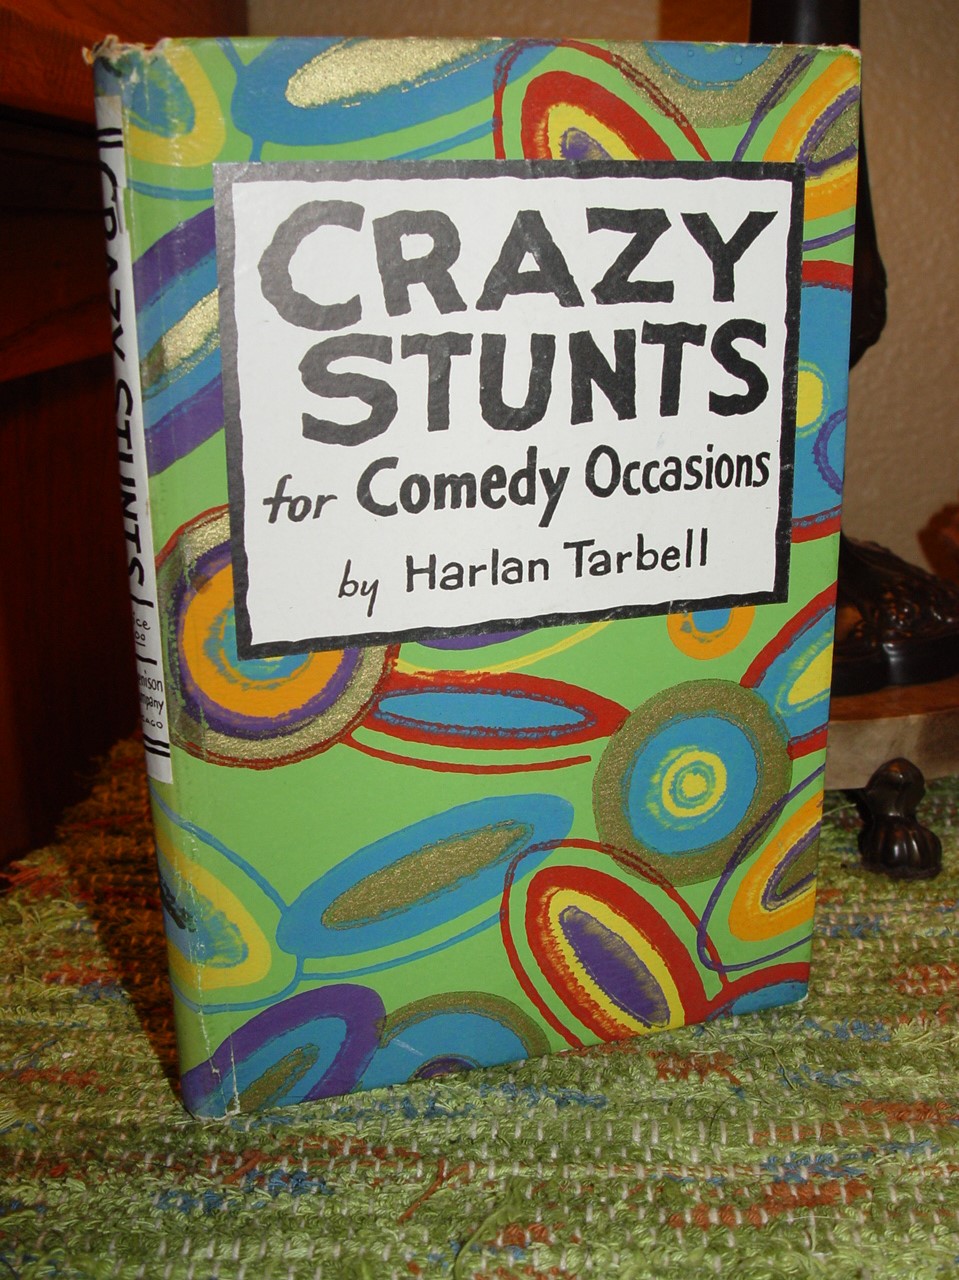 Crazy Stunts for Comedy Occasions 1929 ~
                        Illustrated by Harlan Tarbell